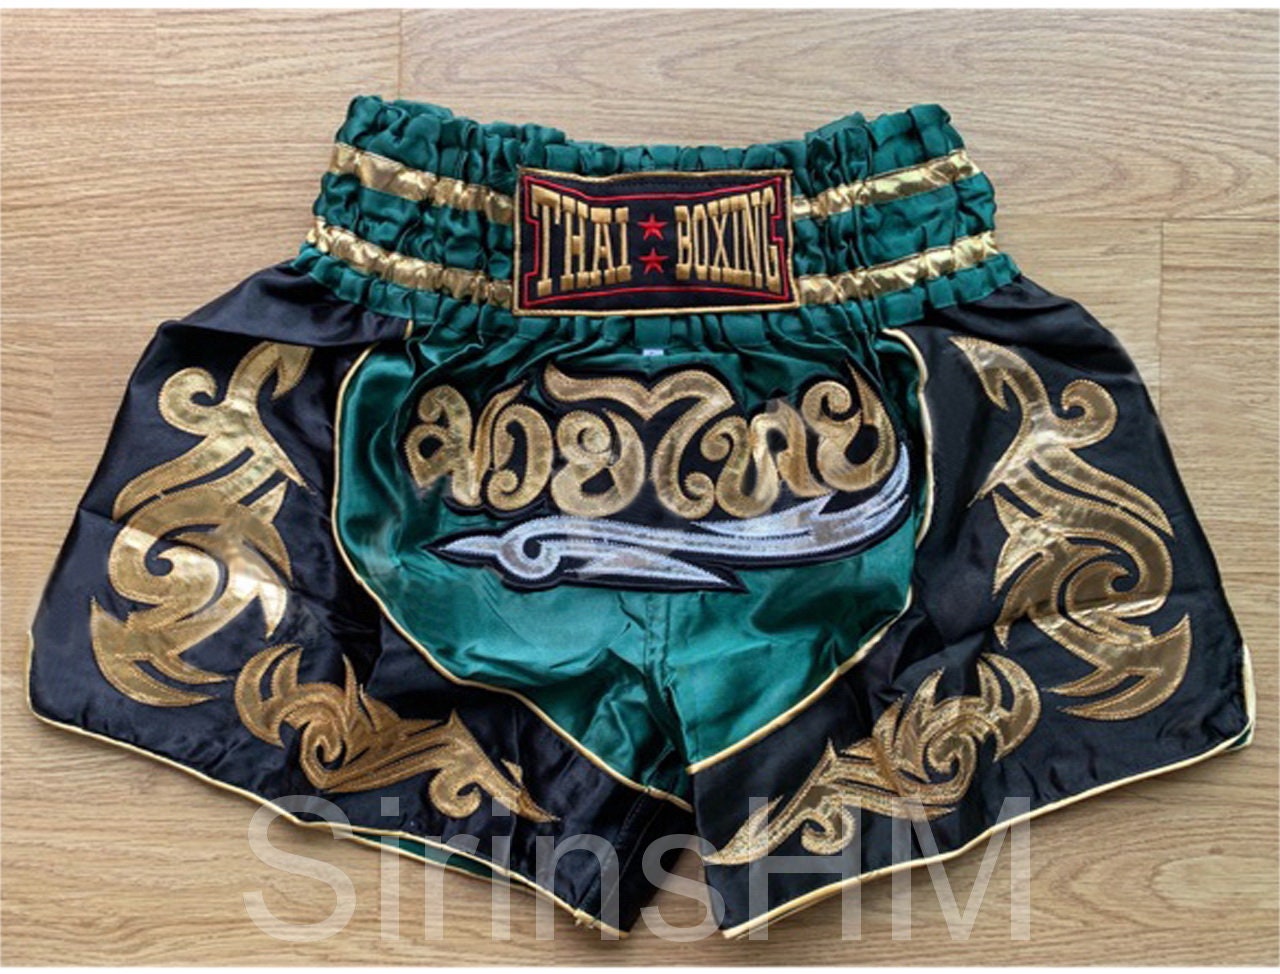 Muay Thai Boxing Shorts for Adult Green Black With Gold Thai Stripe 